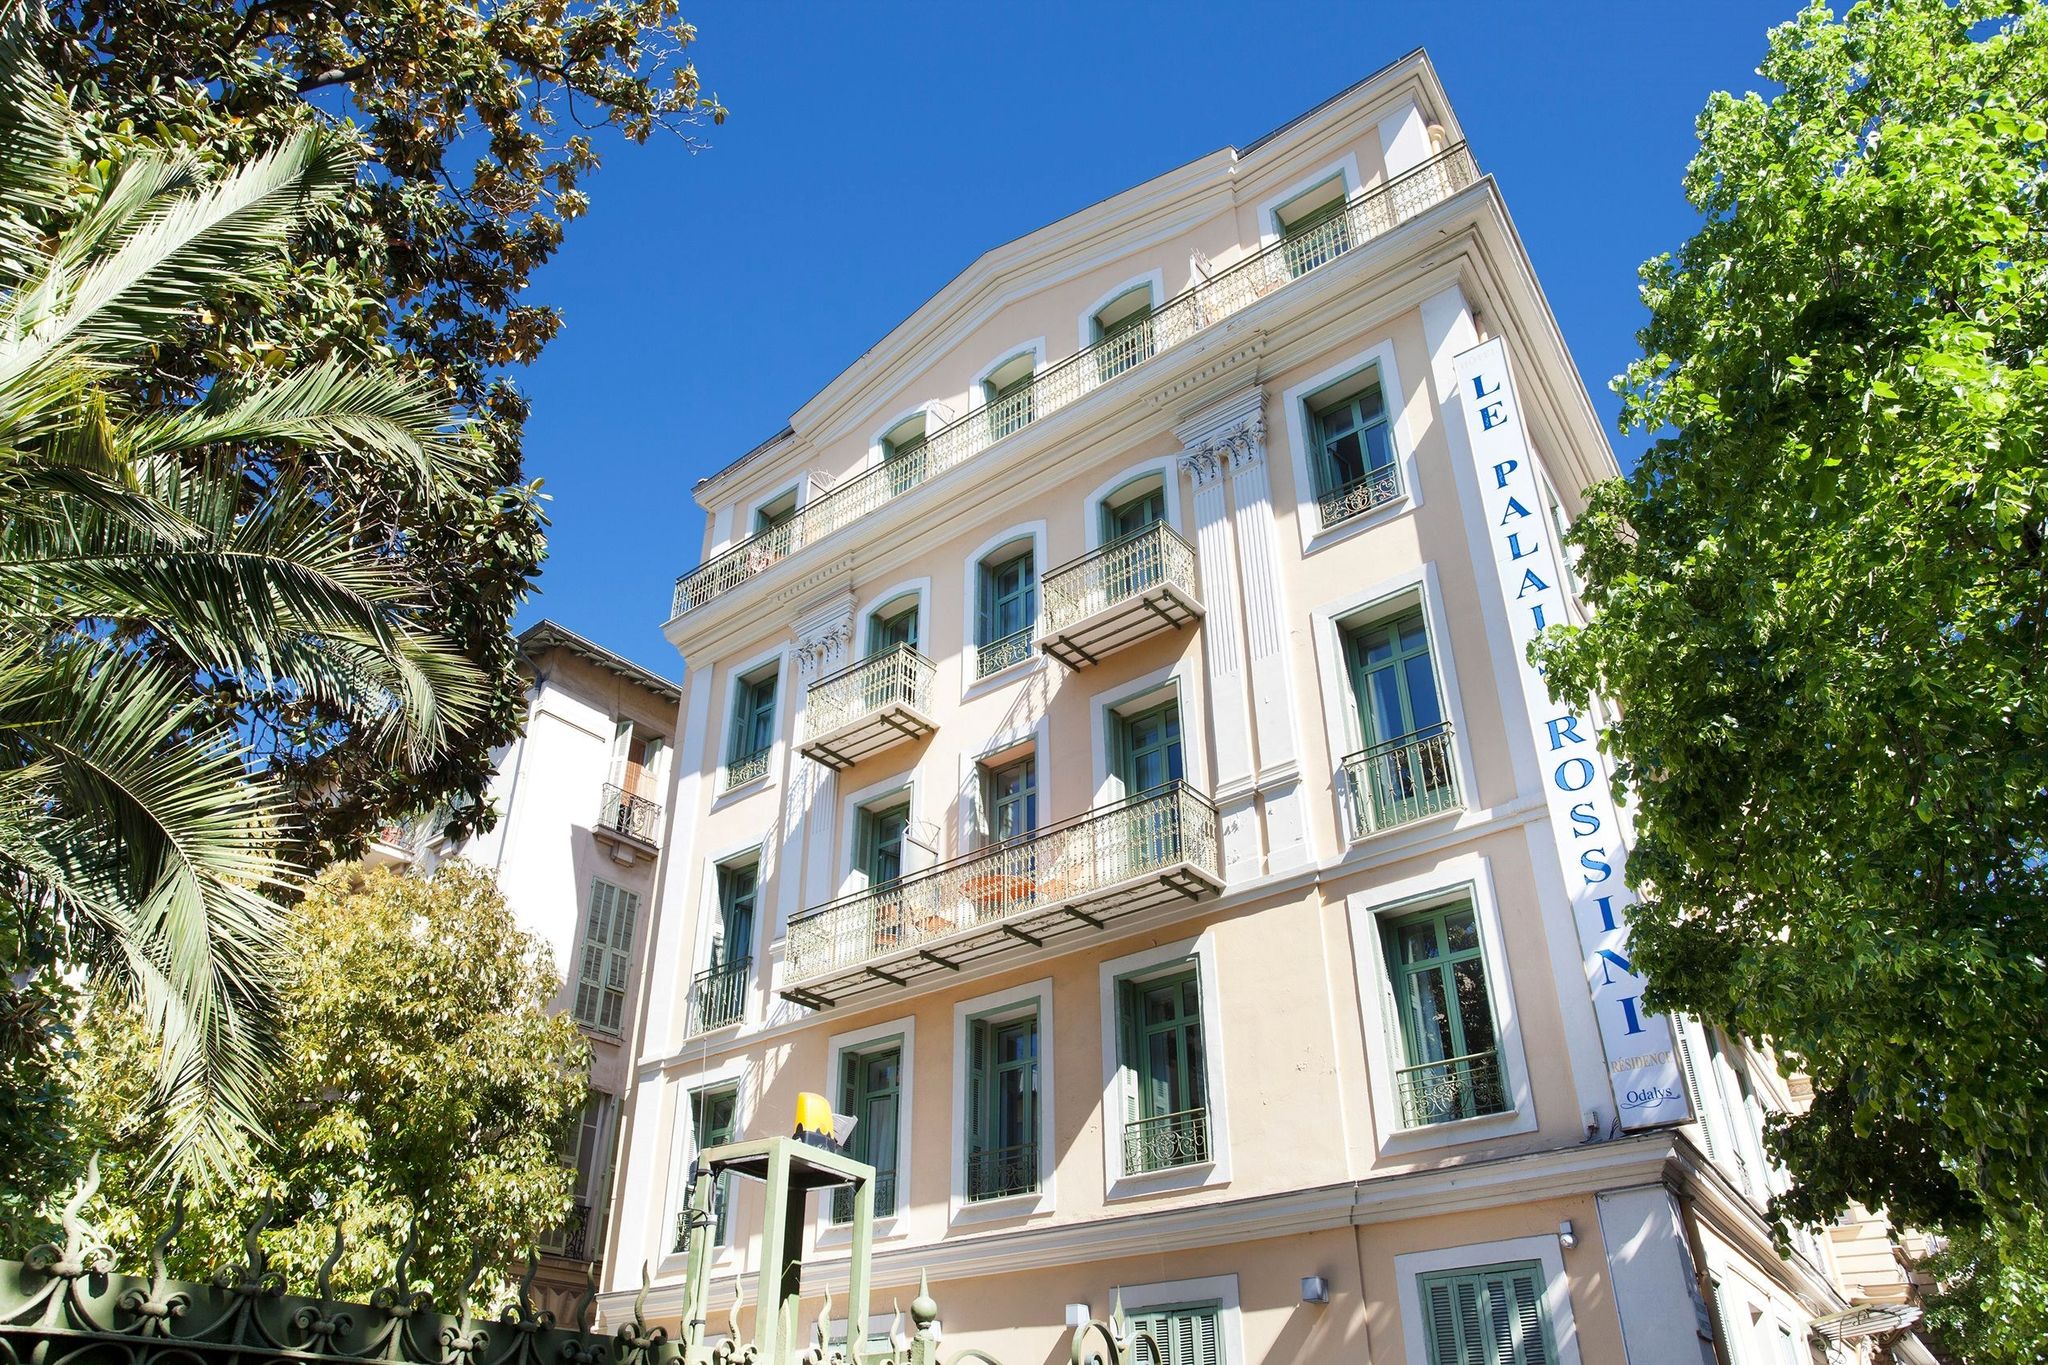 Stately apartment in a former hotel in the heart of Nice